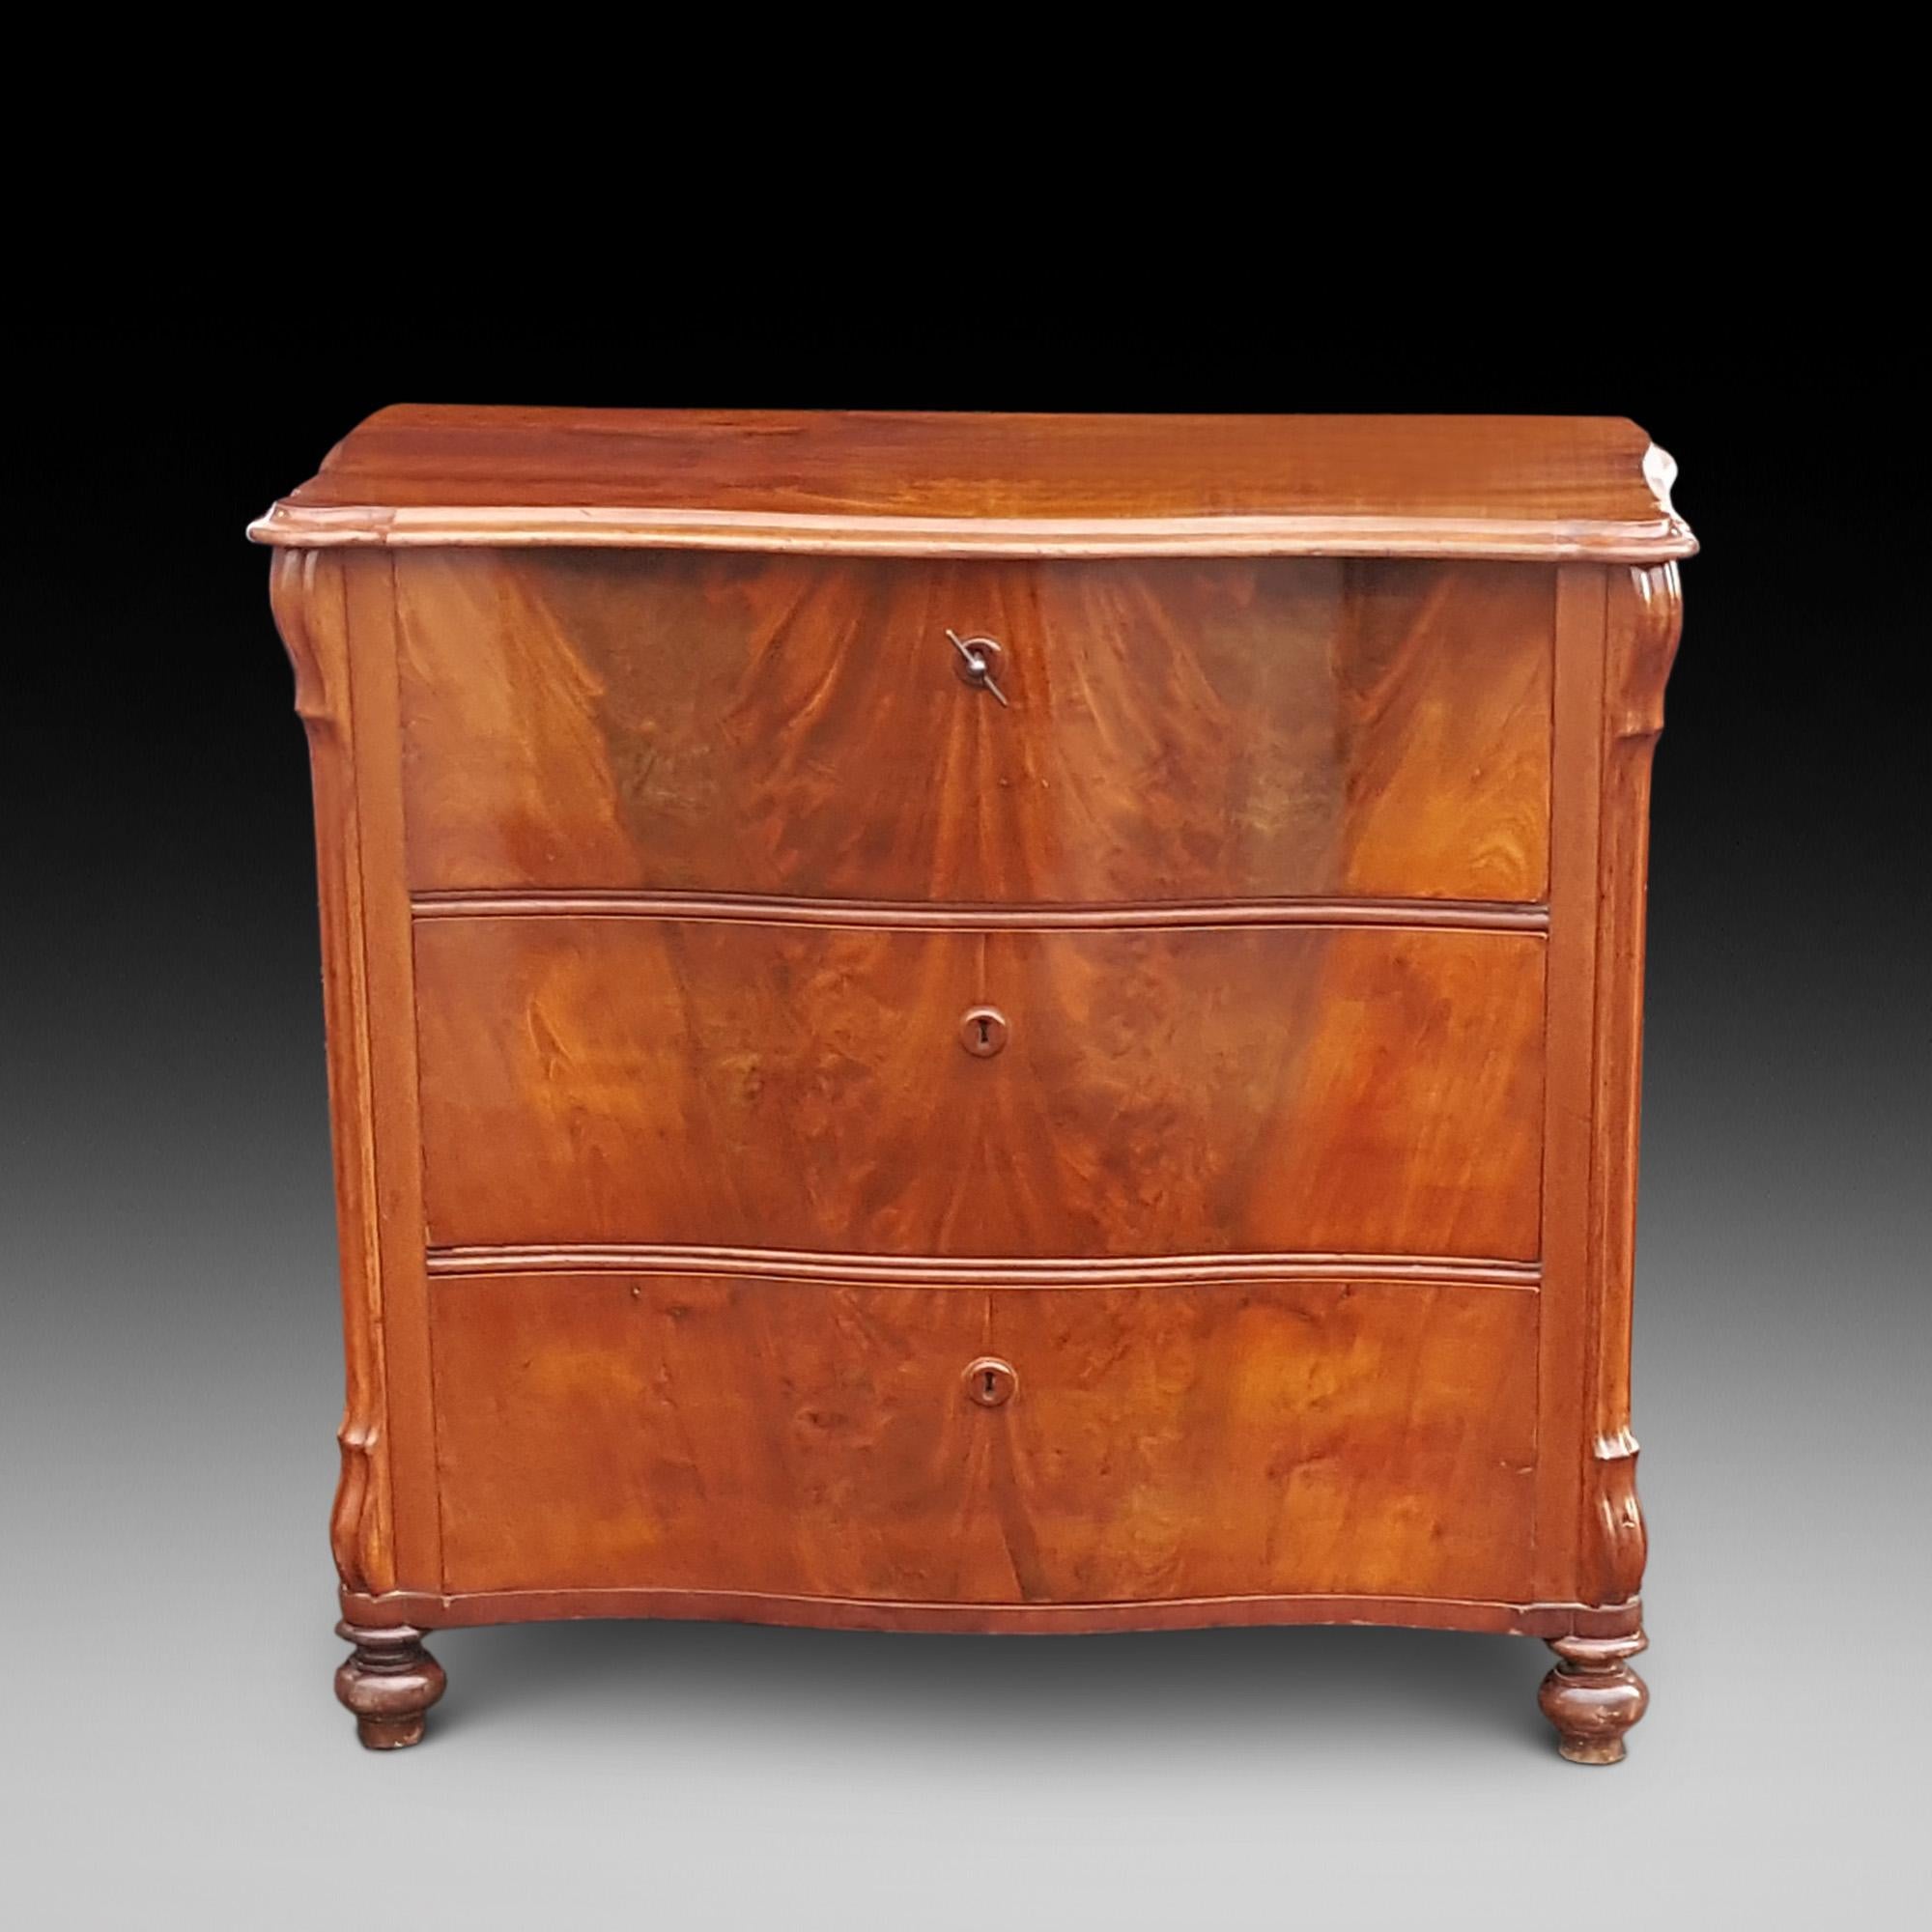 Late 19th century Biedermeier flame mahogany serpentine fronted chest of three drawers on bun feet - 36